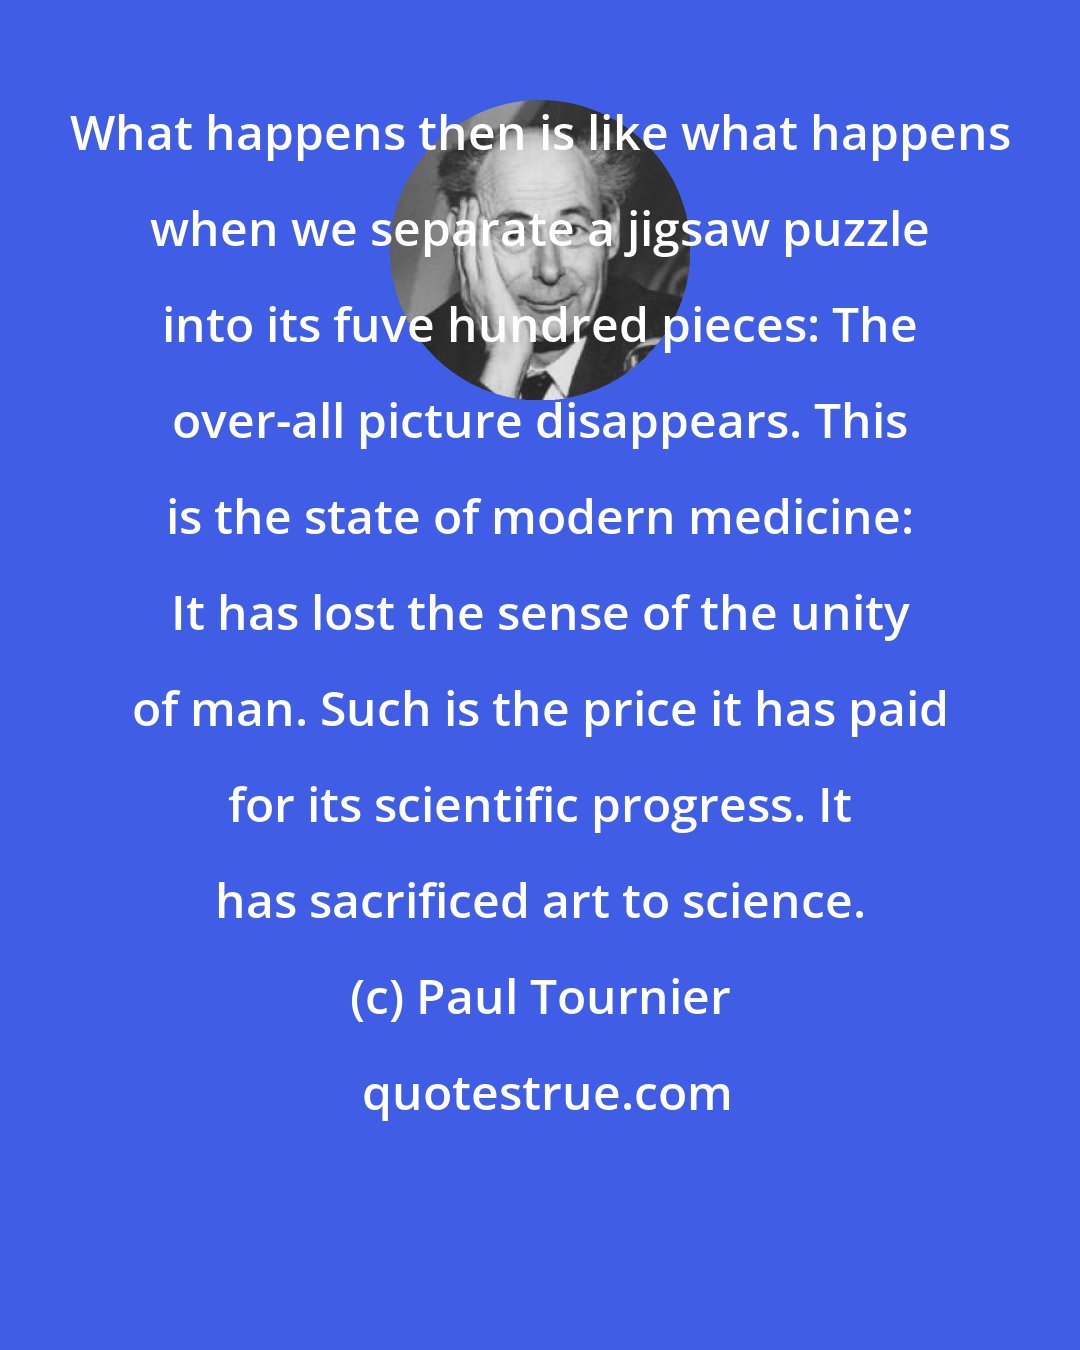 Paul Tournier: What happens then is like what happens when we separate a jigsaw puzzle into its fuve hundred pieces: The over-all picture disappears. This is the state of modern medicine: It has lost the sense of the unity of man. Such is the price it has paid for its scientific progress. It has sacrificed art to science.